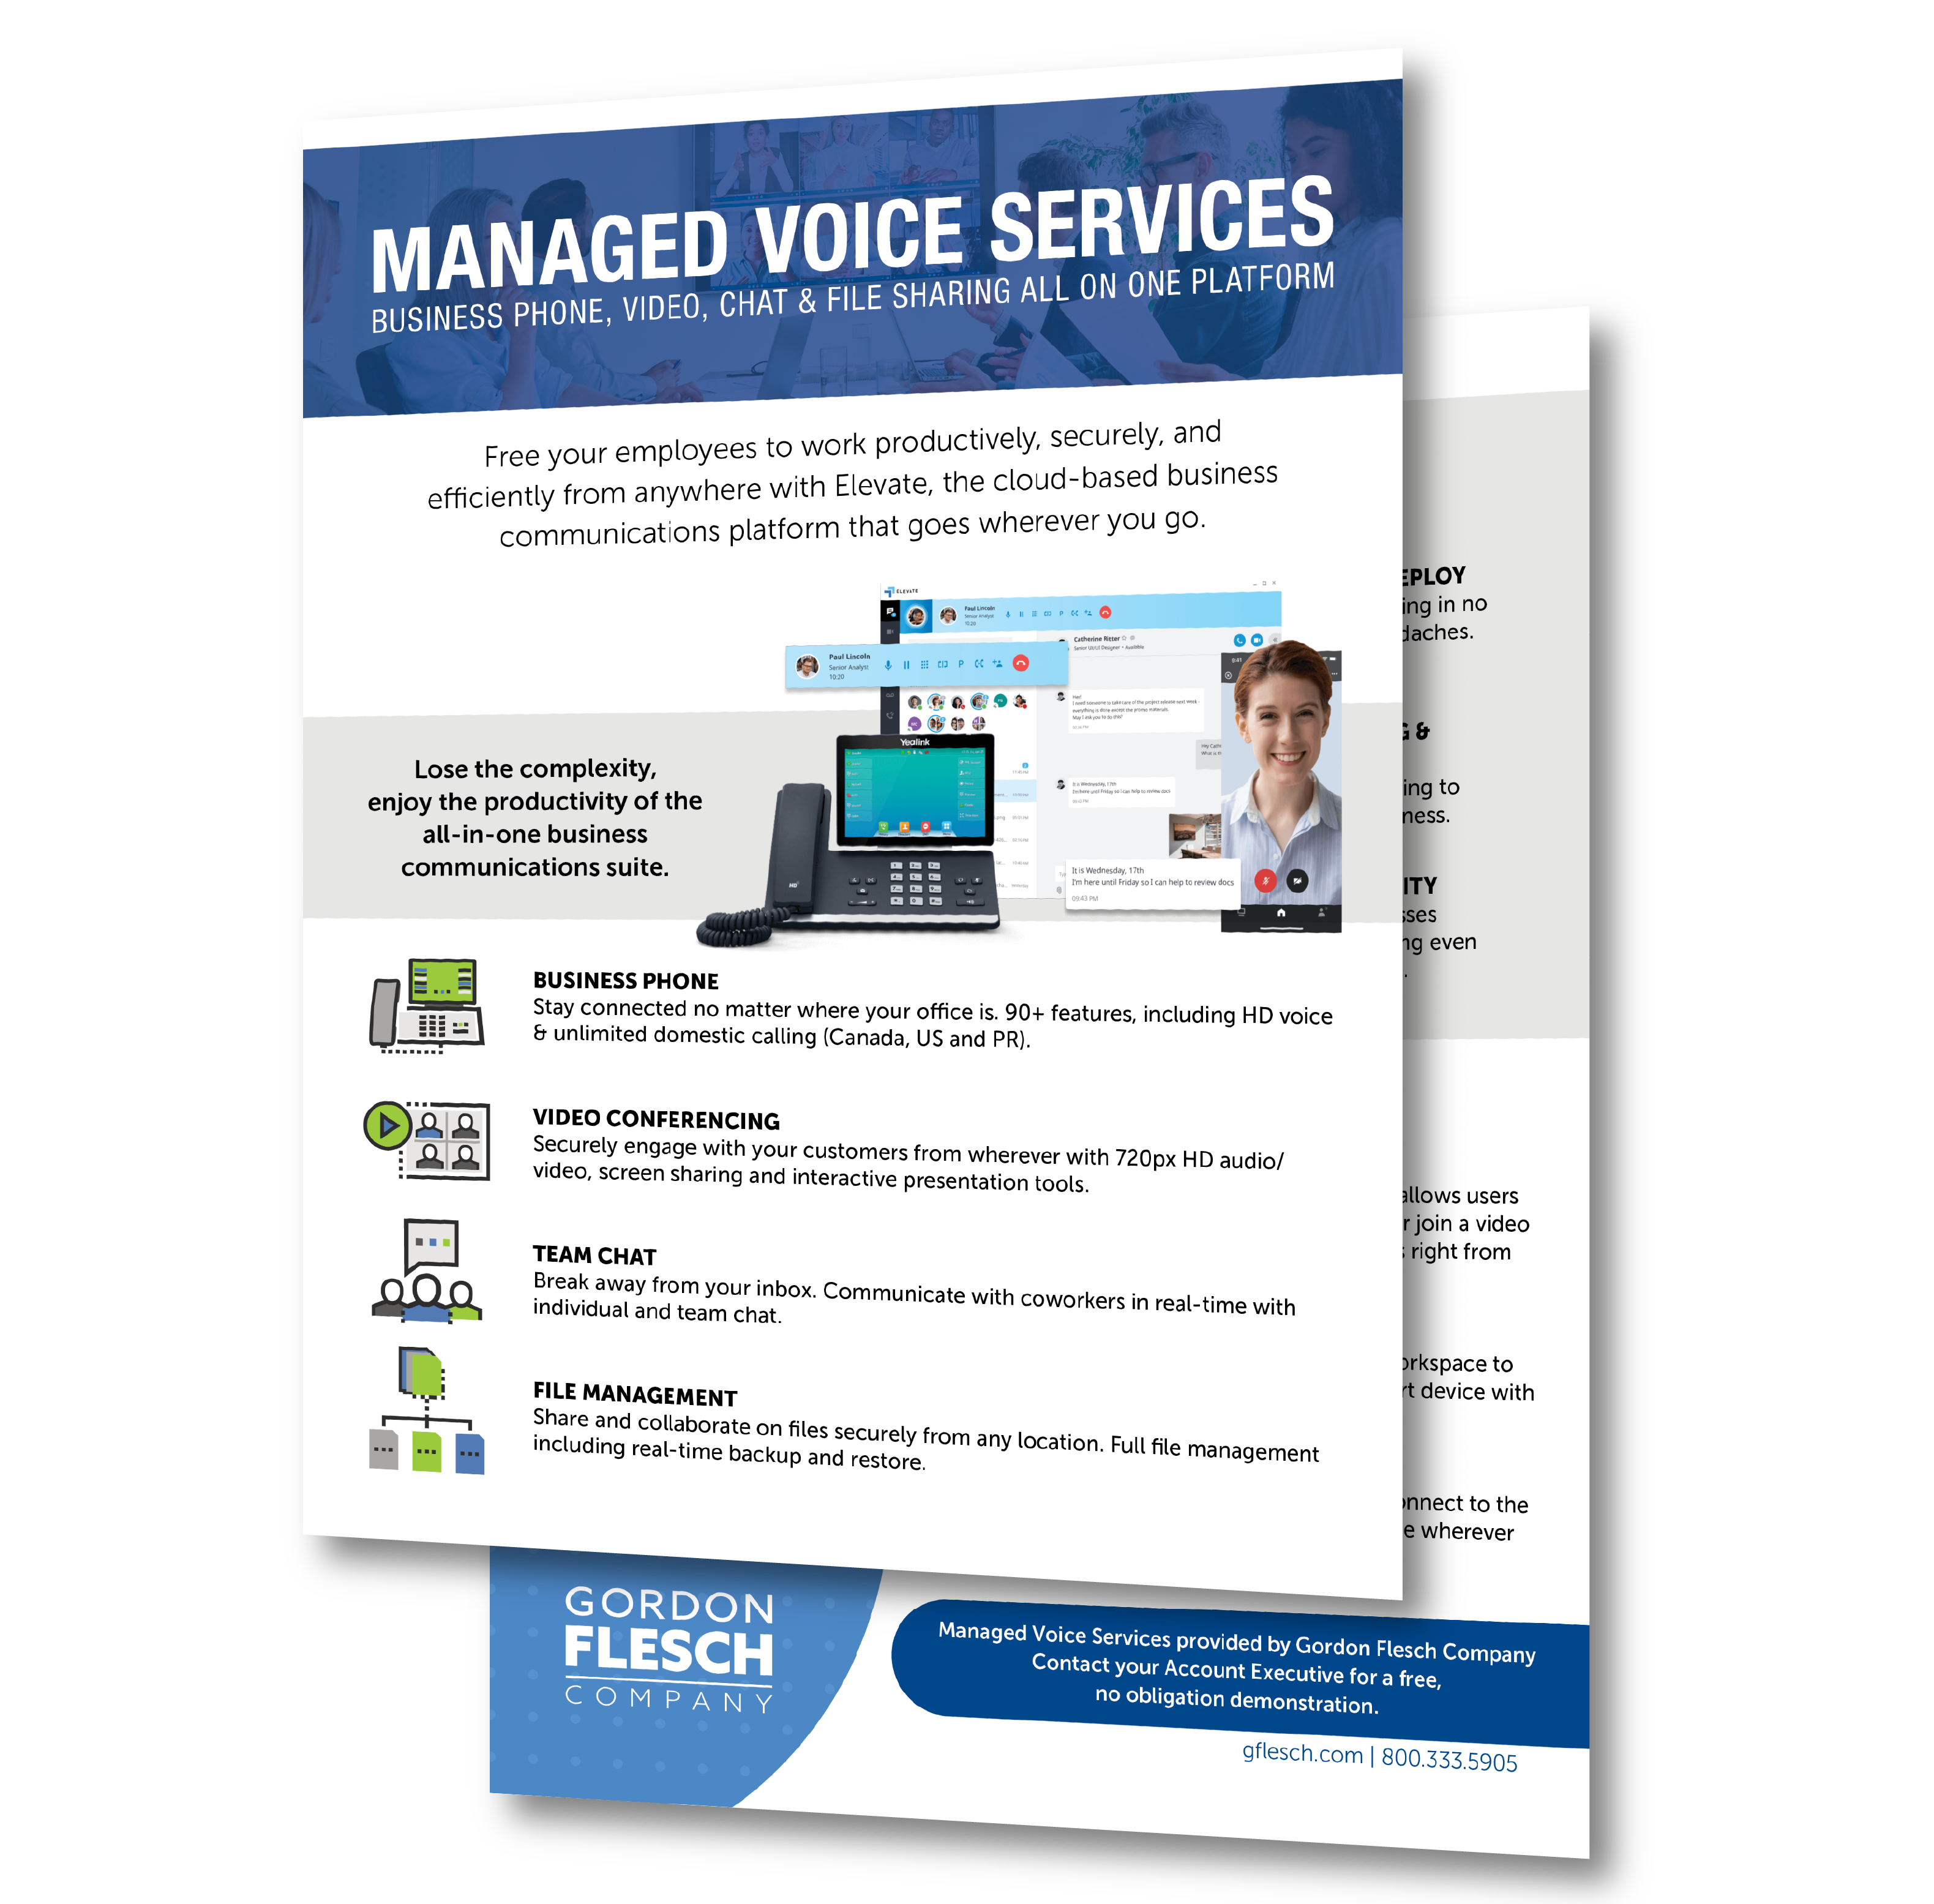 Managed-Voice-Services_Campaign_Banners_Pages-1